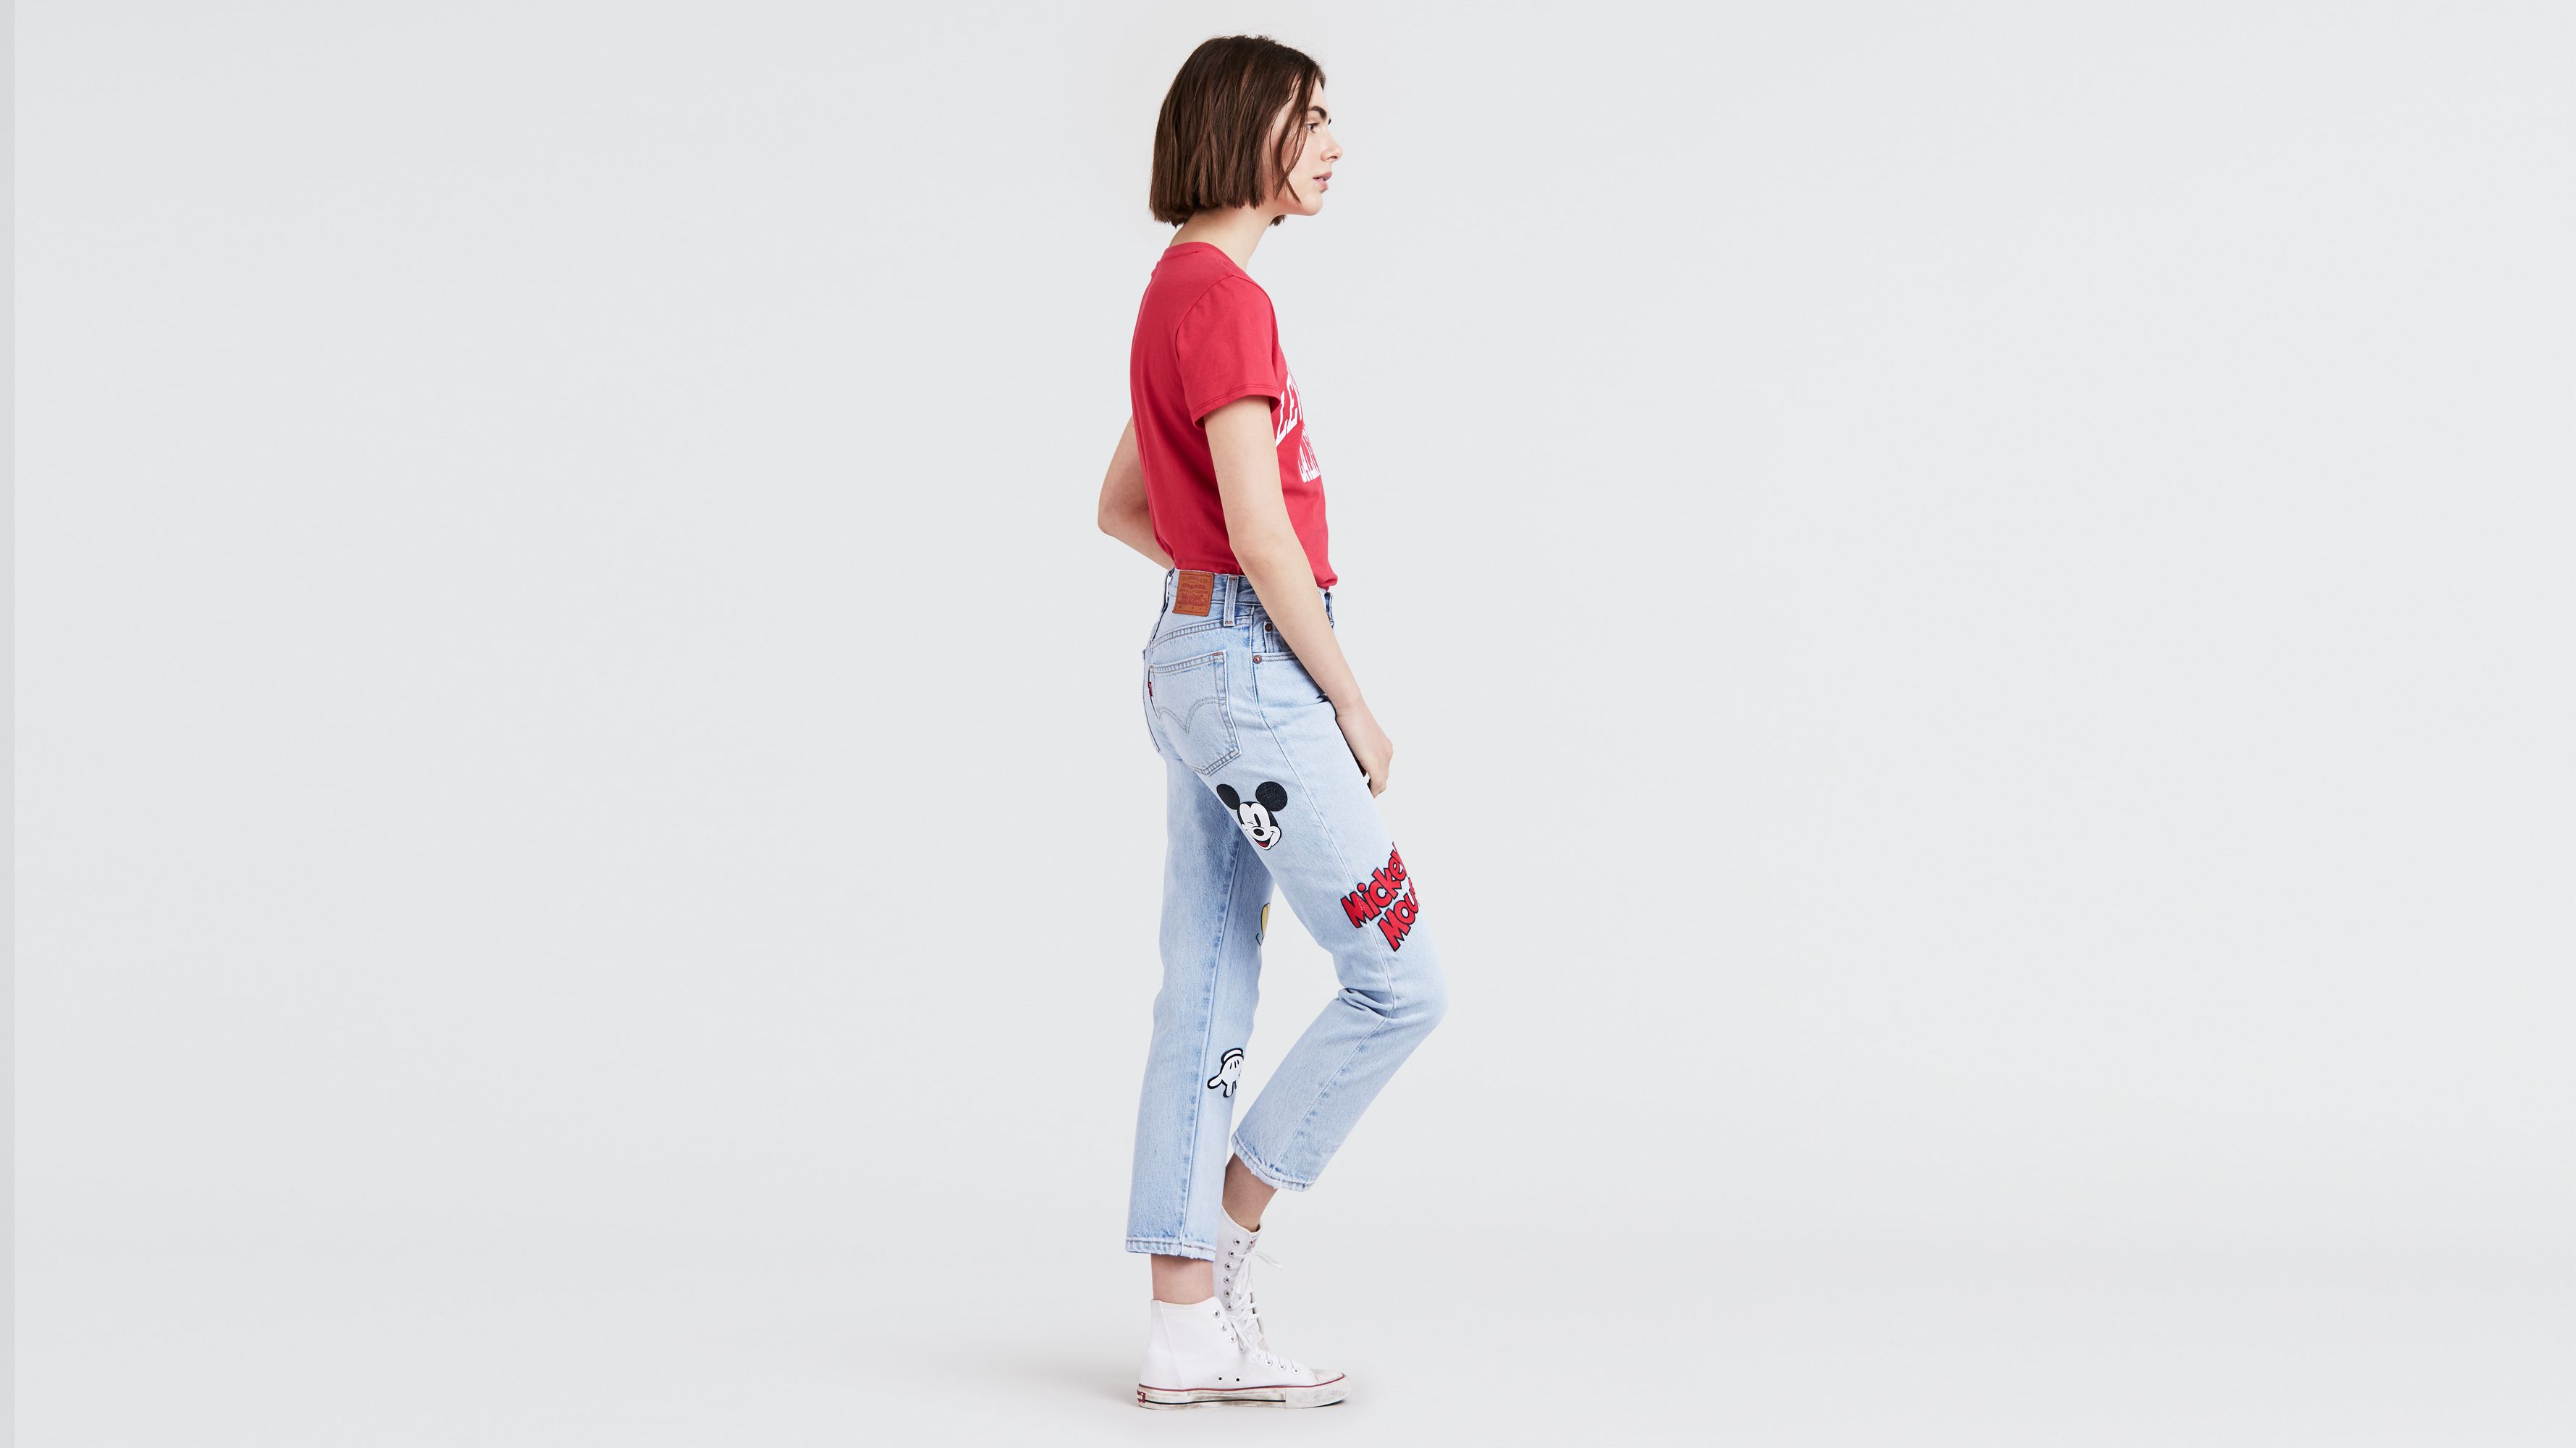 levi's mickey mouse jeans womens